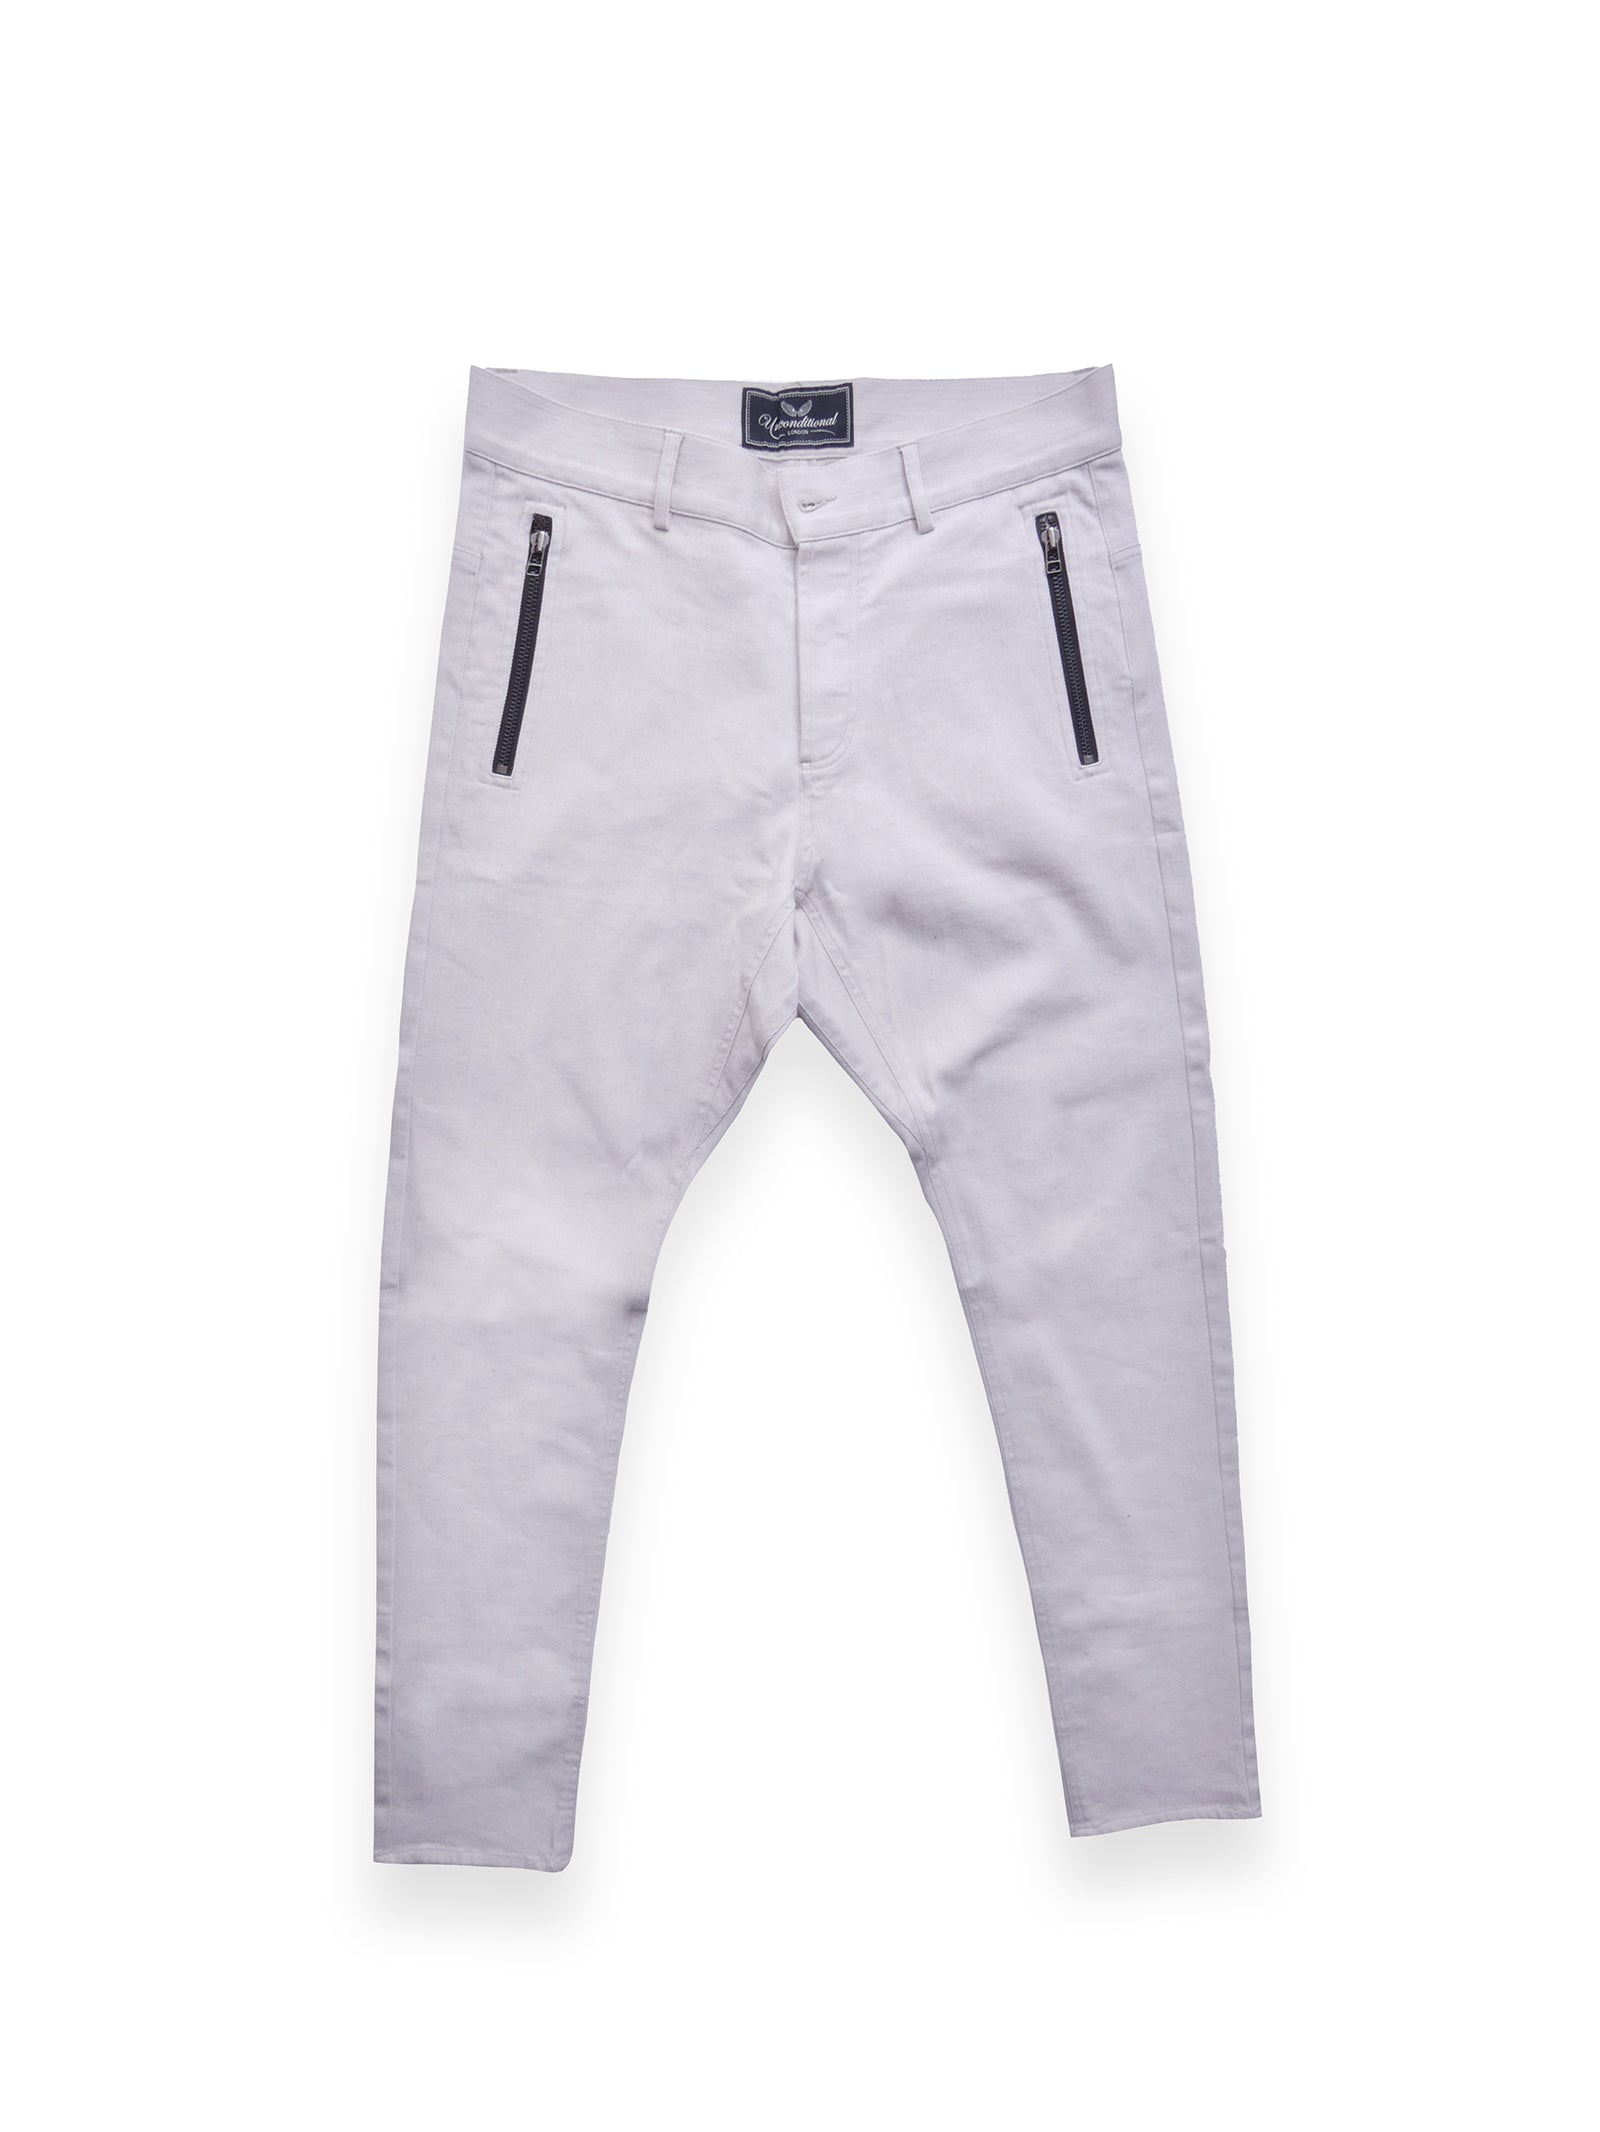 Off White Unconditional Jeans With Black Zip Details